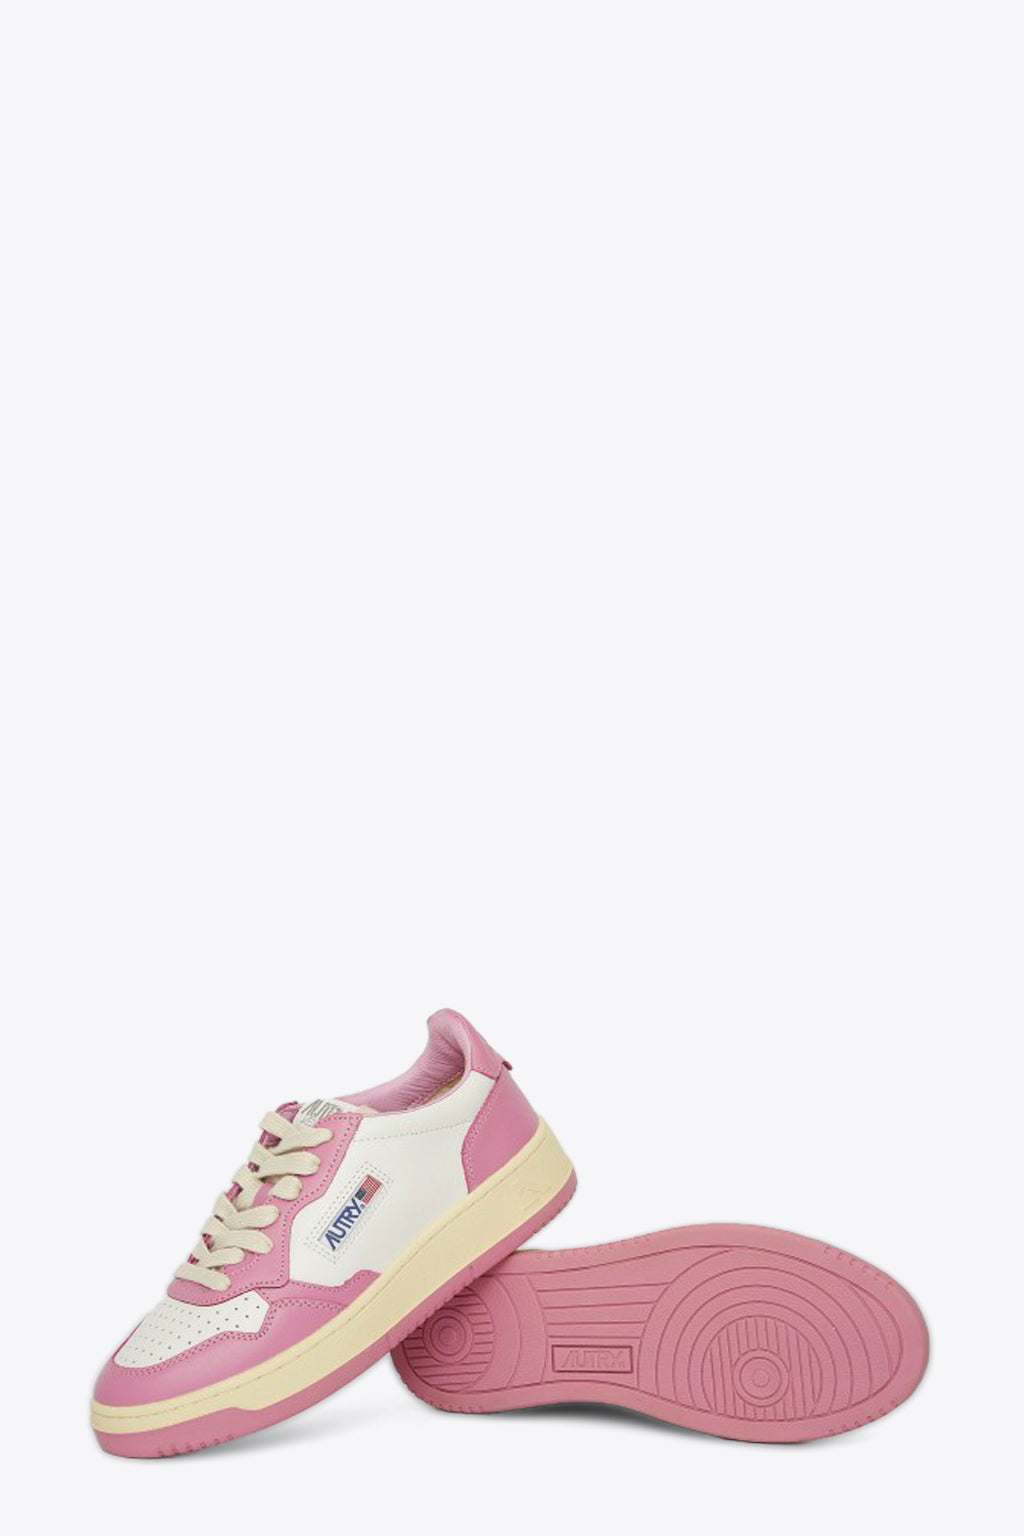 alt-image__Pink-and-white-leather-low-sneaker---Medalist